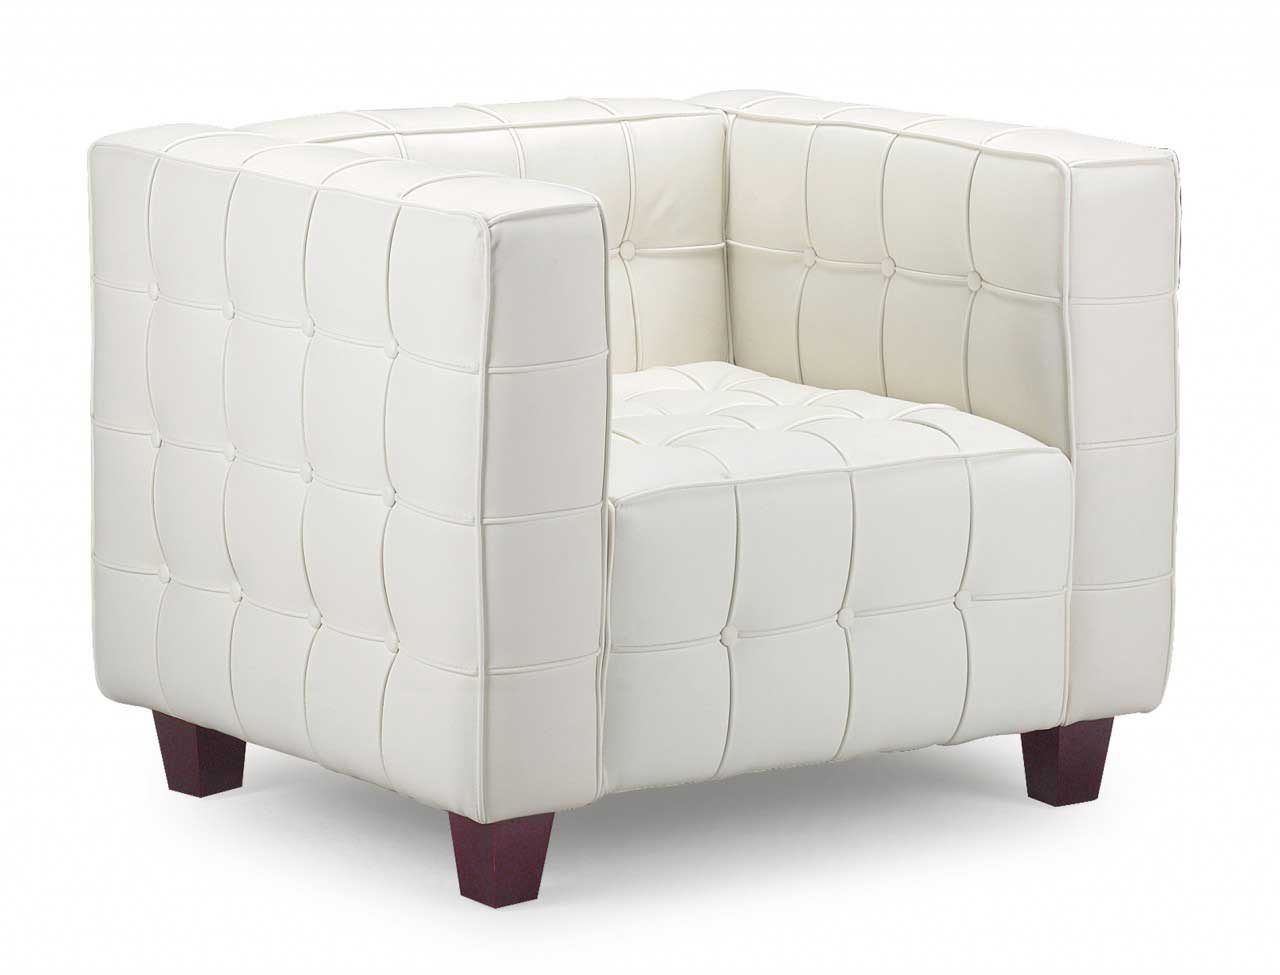 Italian modern white leather chair with arm